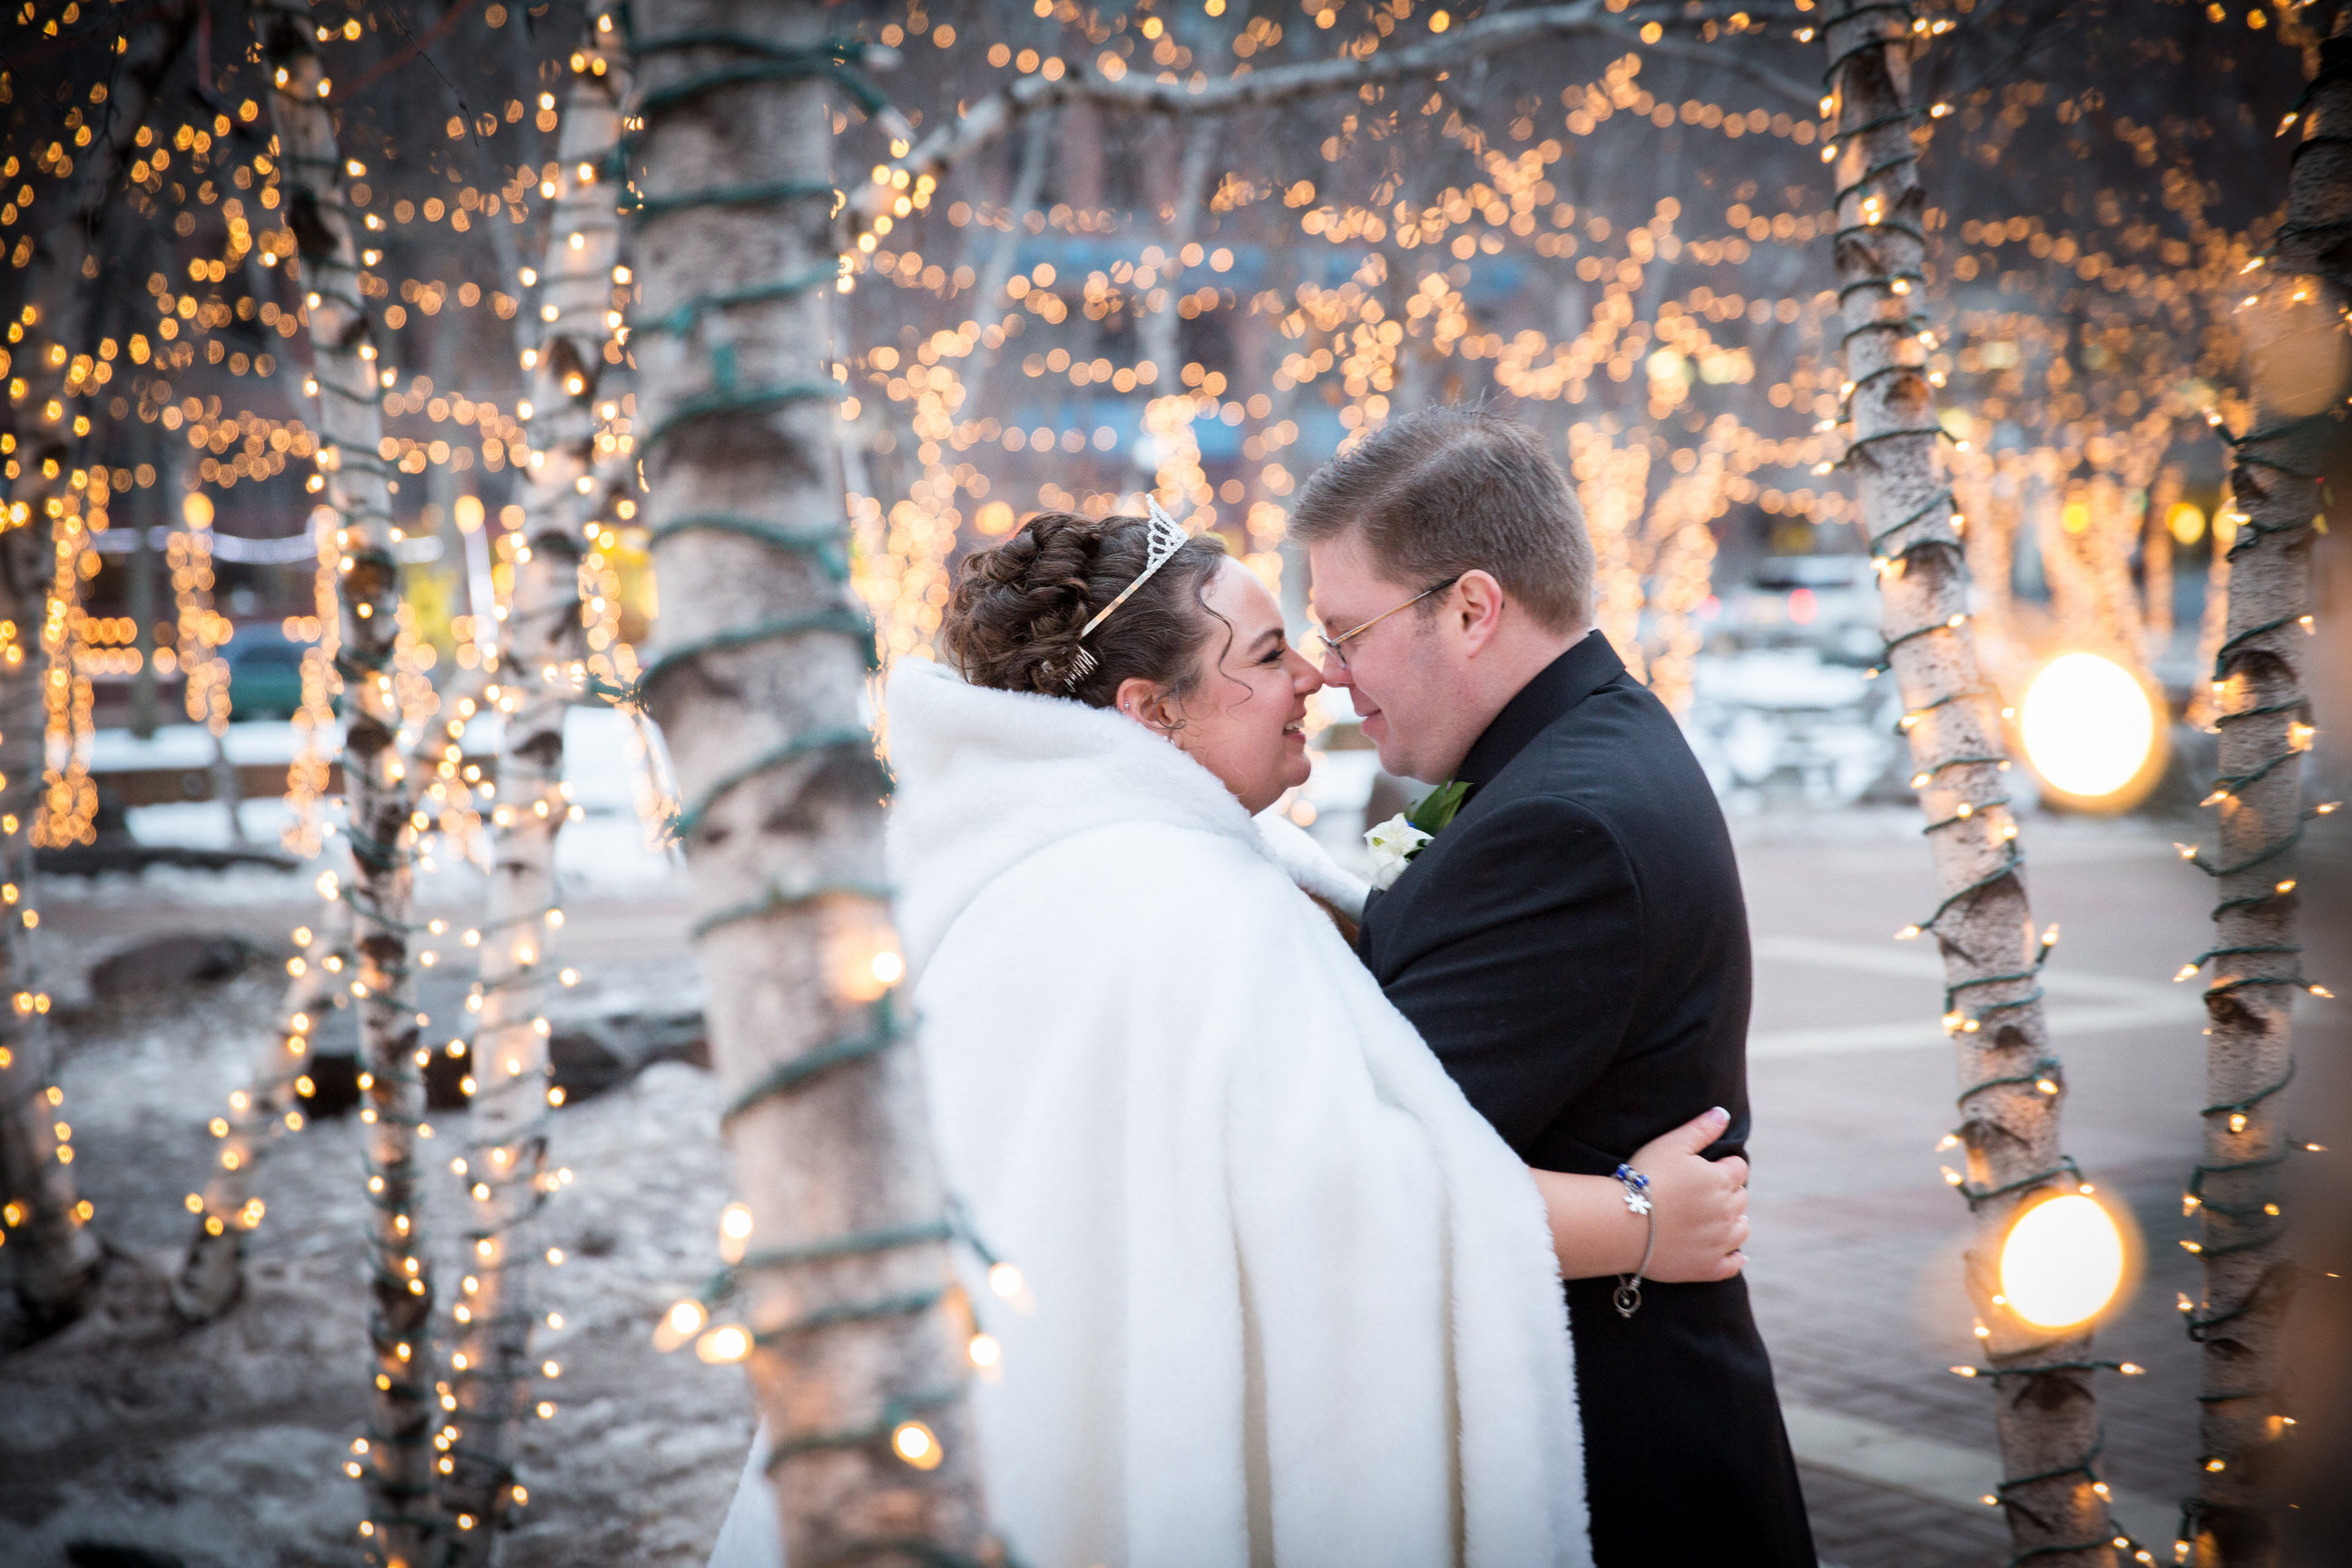 Bride and Groom in snow under Christmas lights